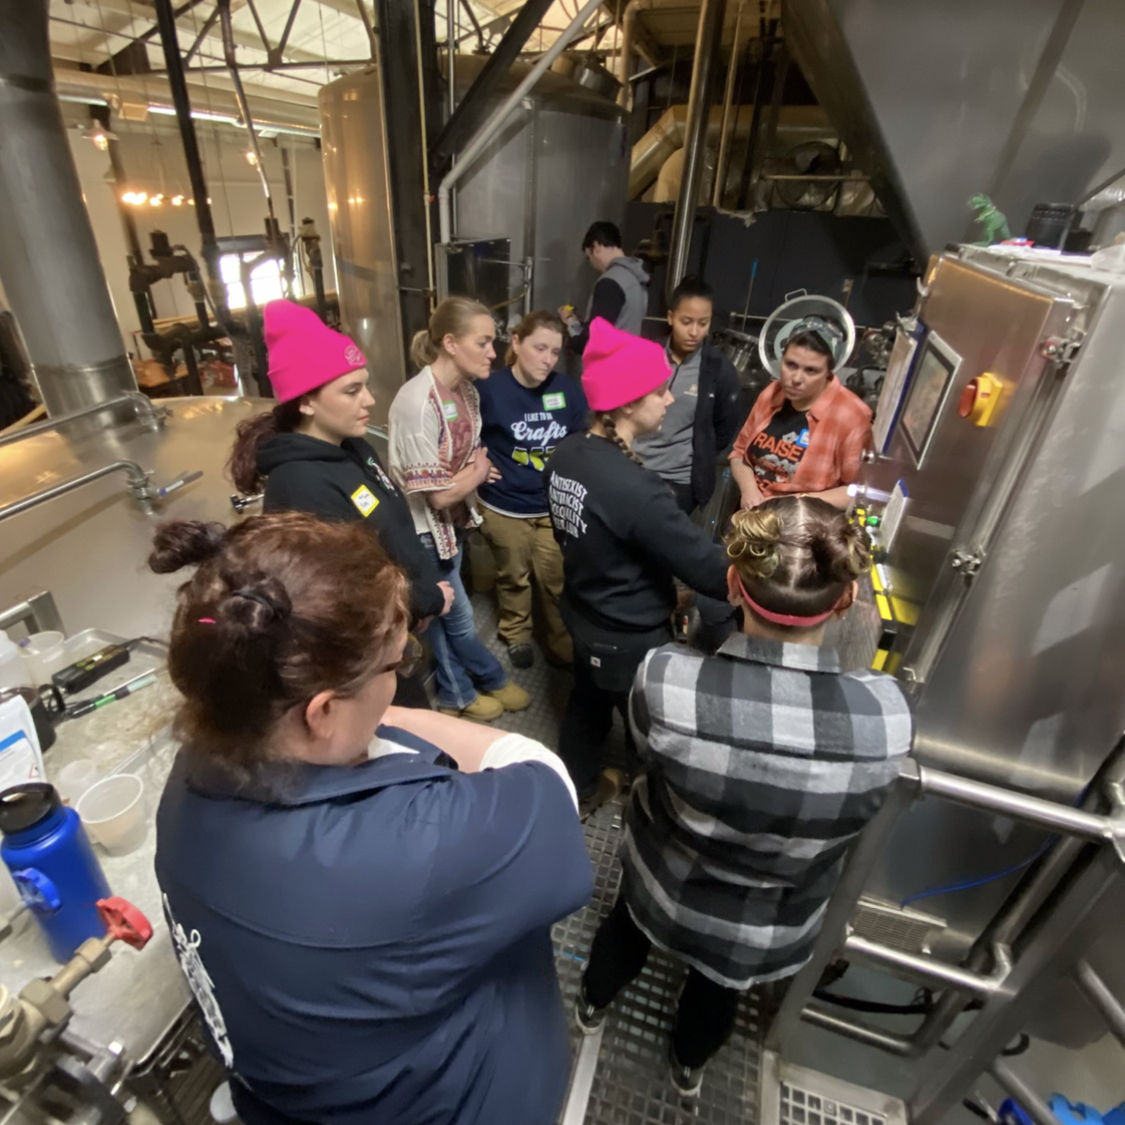 A group of women observe the brew day at Third Space Brewing